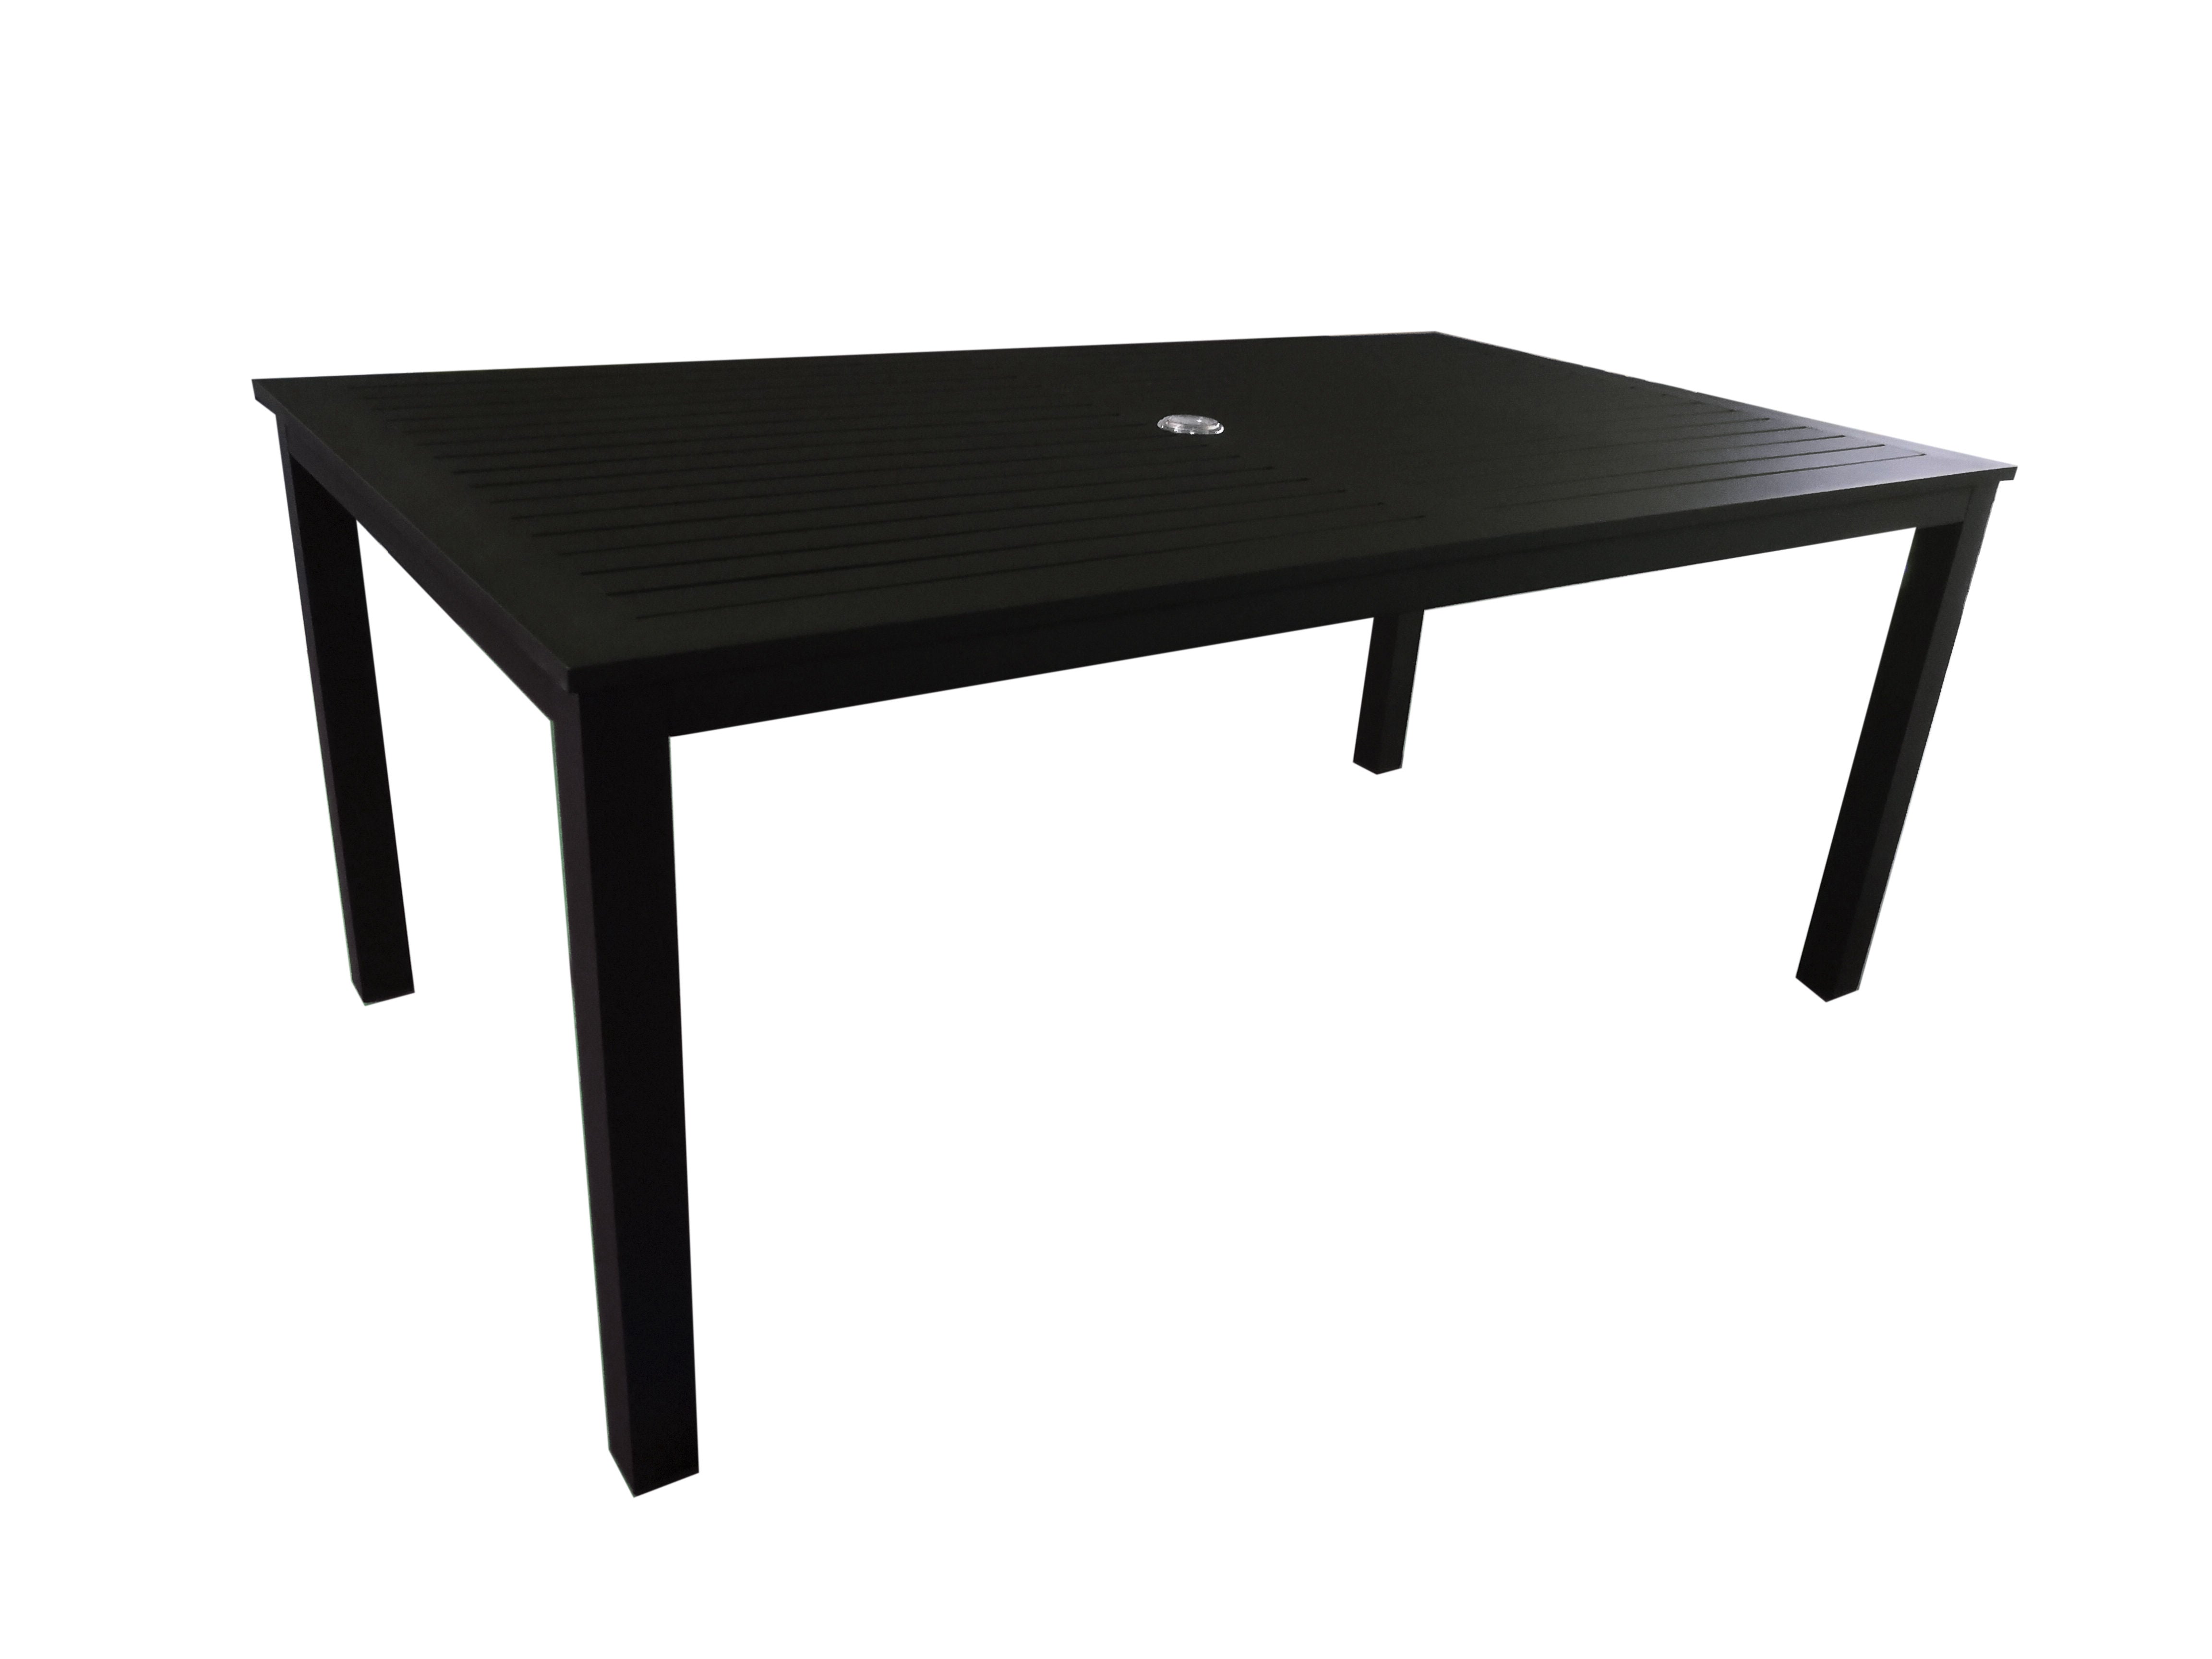 PatioZone Dining Table with Slated Tabletop w/Umbrella Hole in Middle and Aluminum Frame (MOSS-T304N) - Matte Black